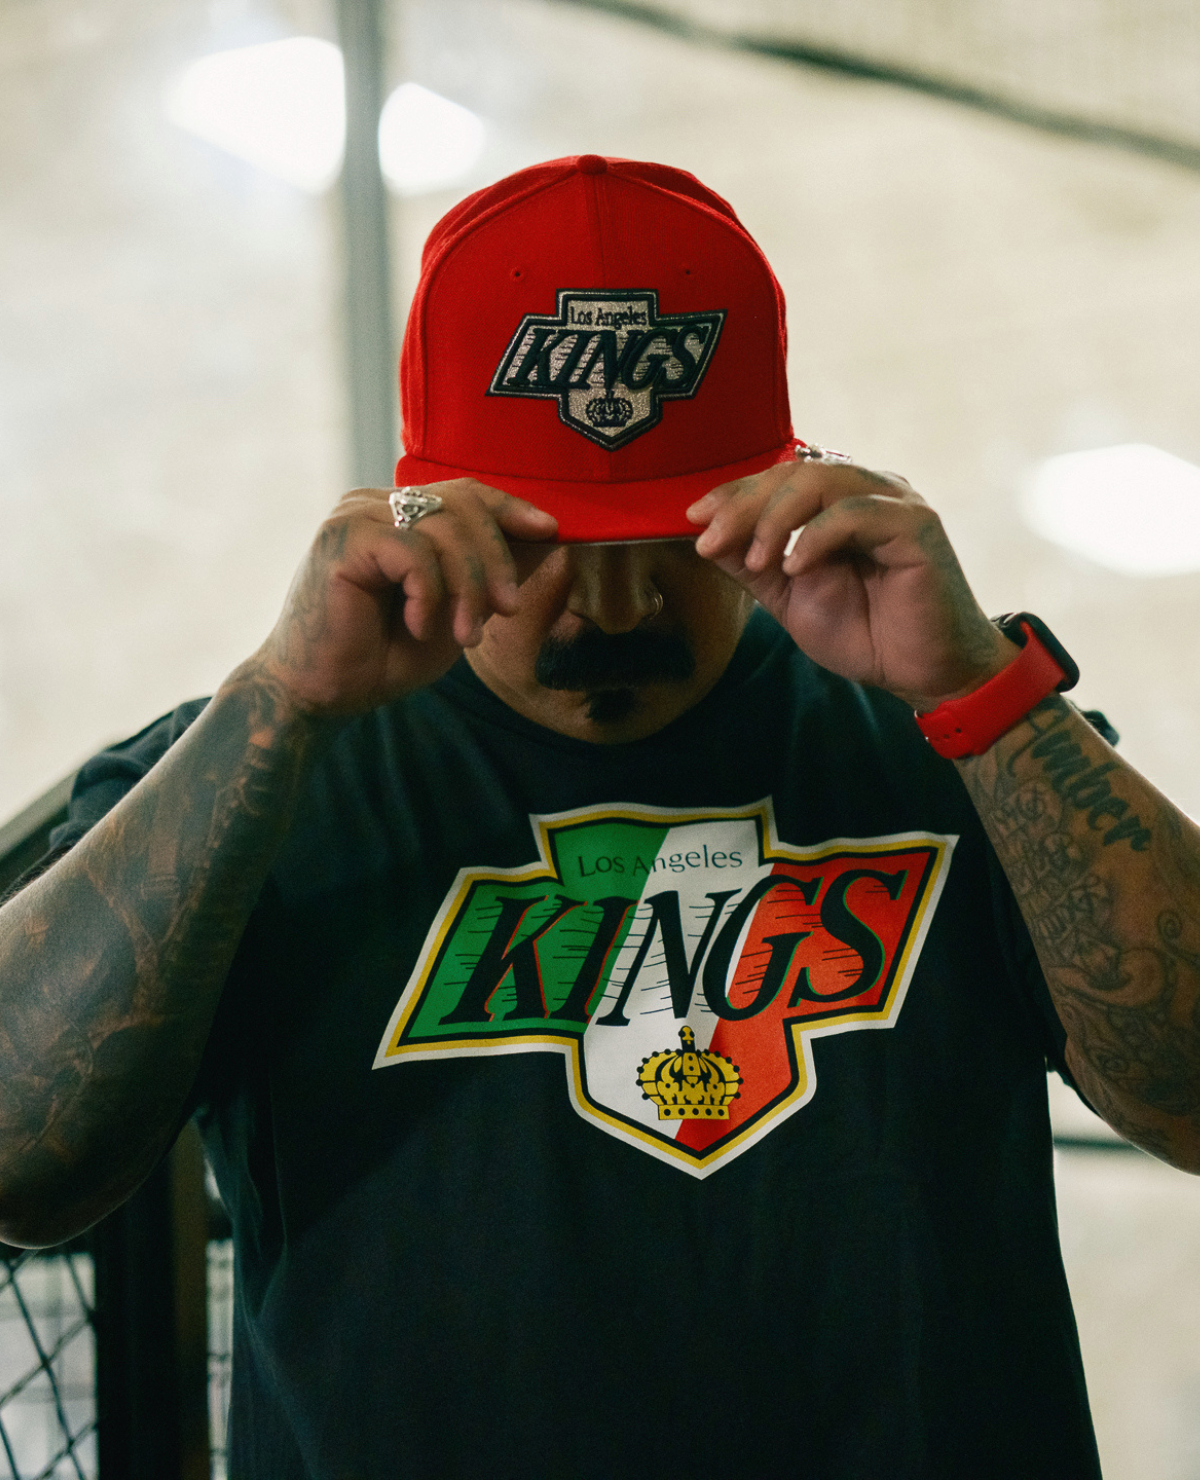 Lifetipsforbetterliving Hockey Clothing company - The Los Angeles Kings celebrate their local Mexican Community tonight in some fantastic ways. 